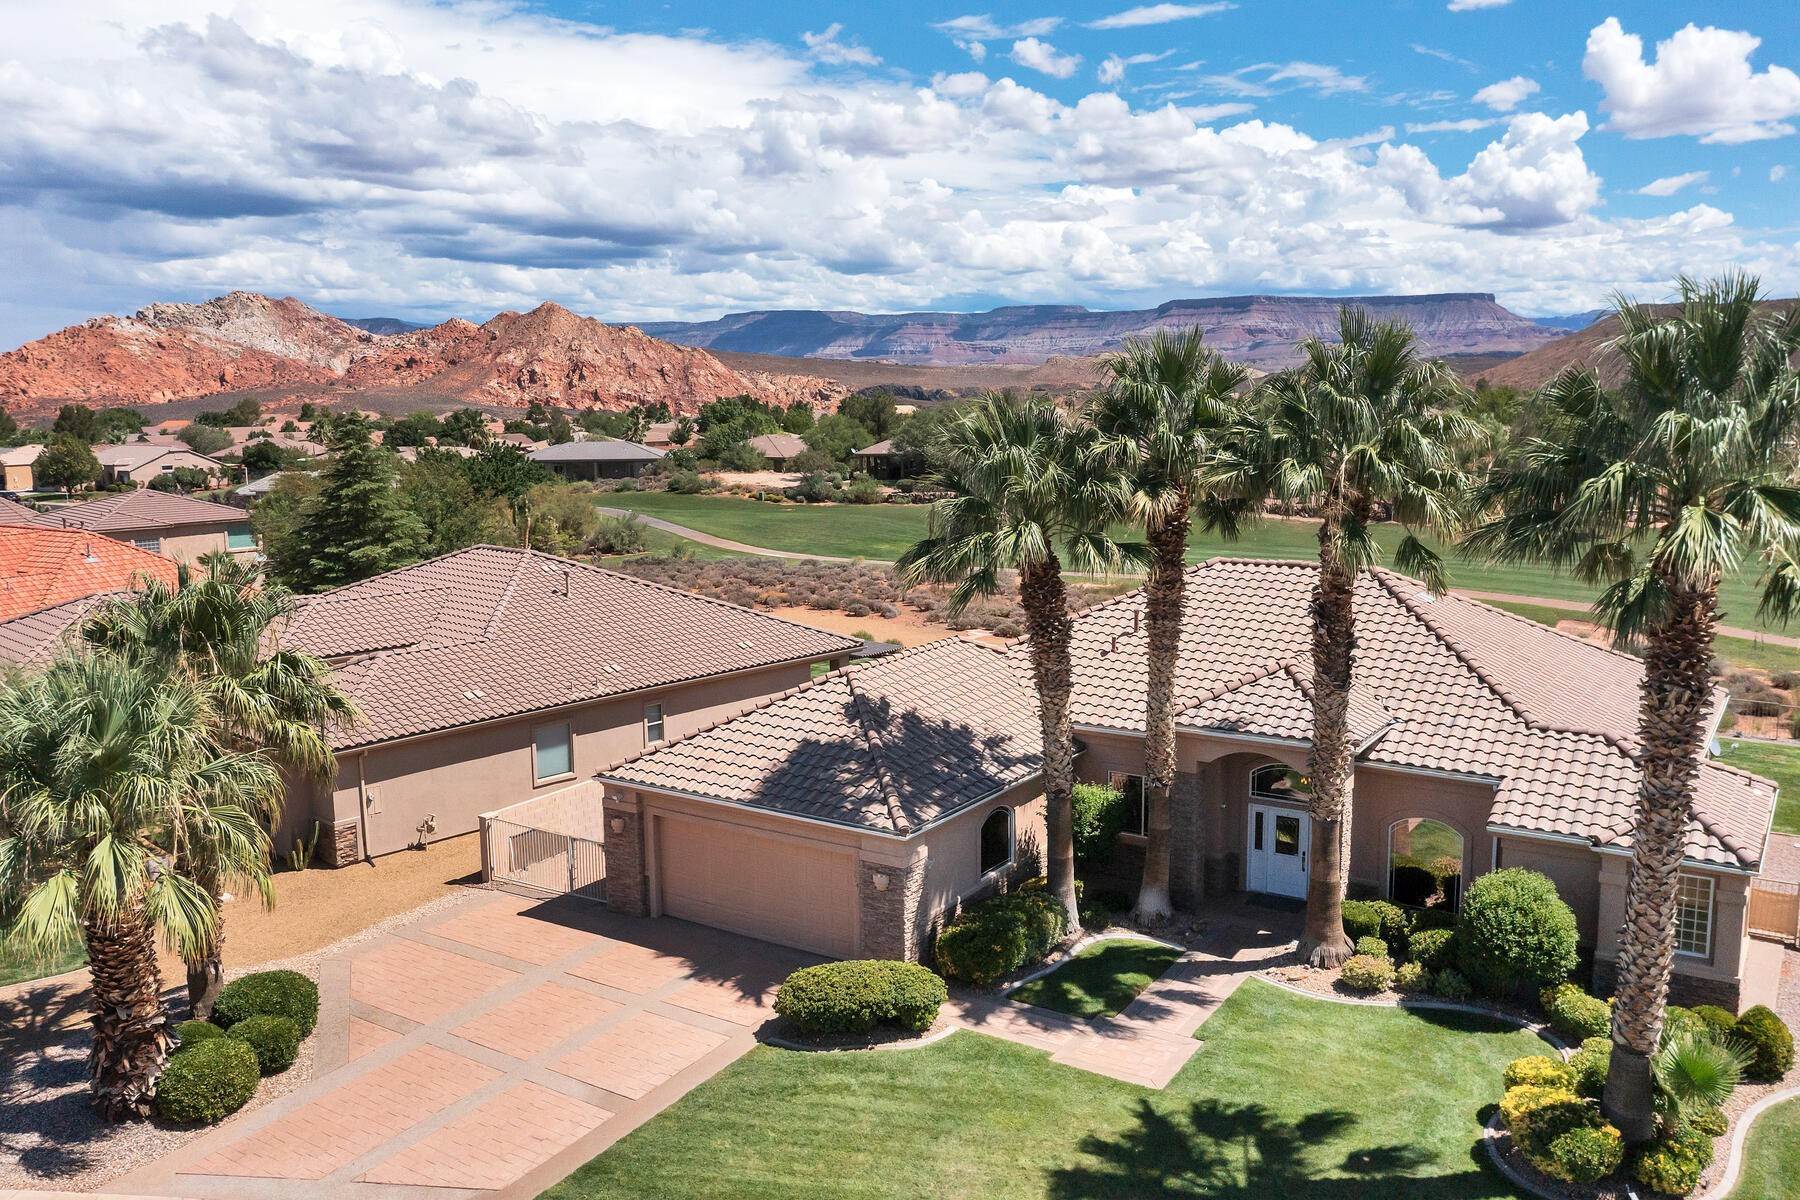 Property for Sale at Unobstructed Golf Course And Red Rock Views 724 North Sky Mountain Blvd Hurricane, Utah 84737 United States